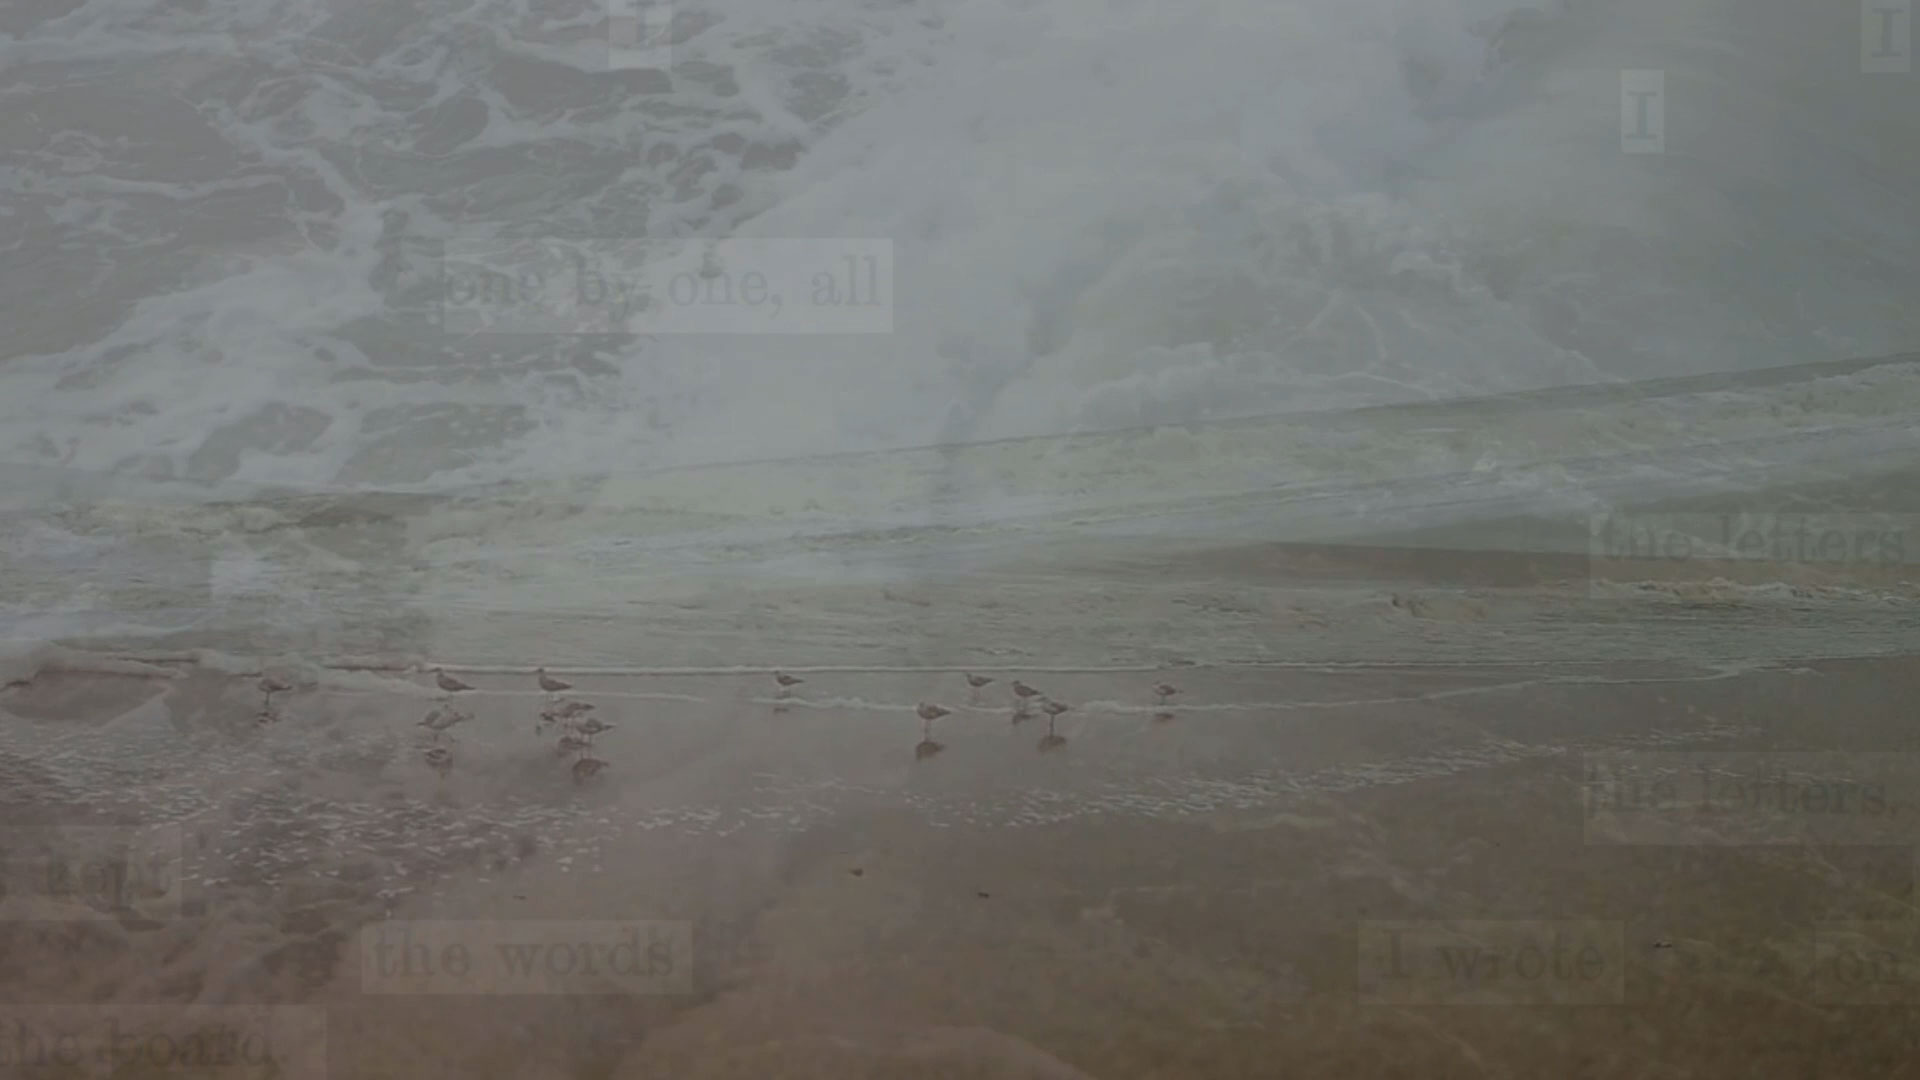 A group of birds populate a calm seashore. The scene is overlaid with a close up of sea forms from wave heating the sand. A faint layer of letter cutouts are visible here and there.